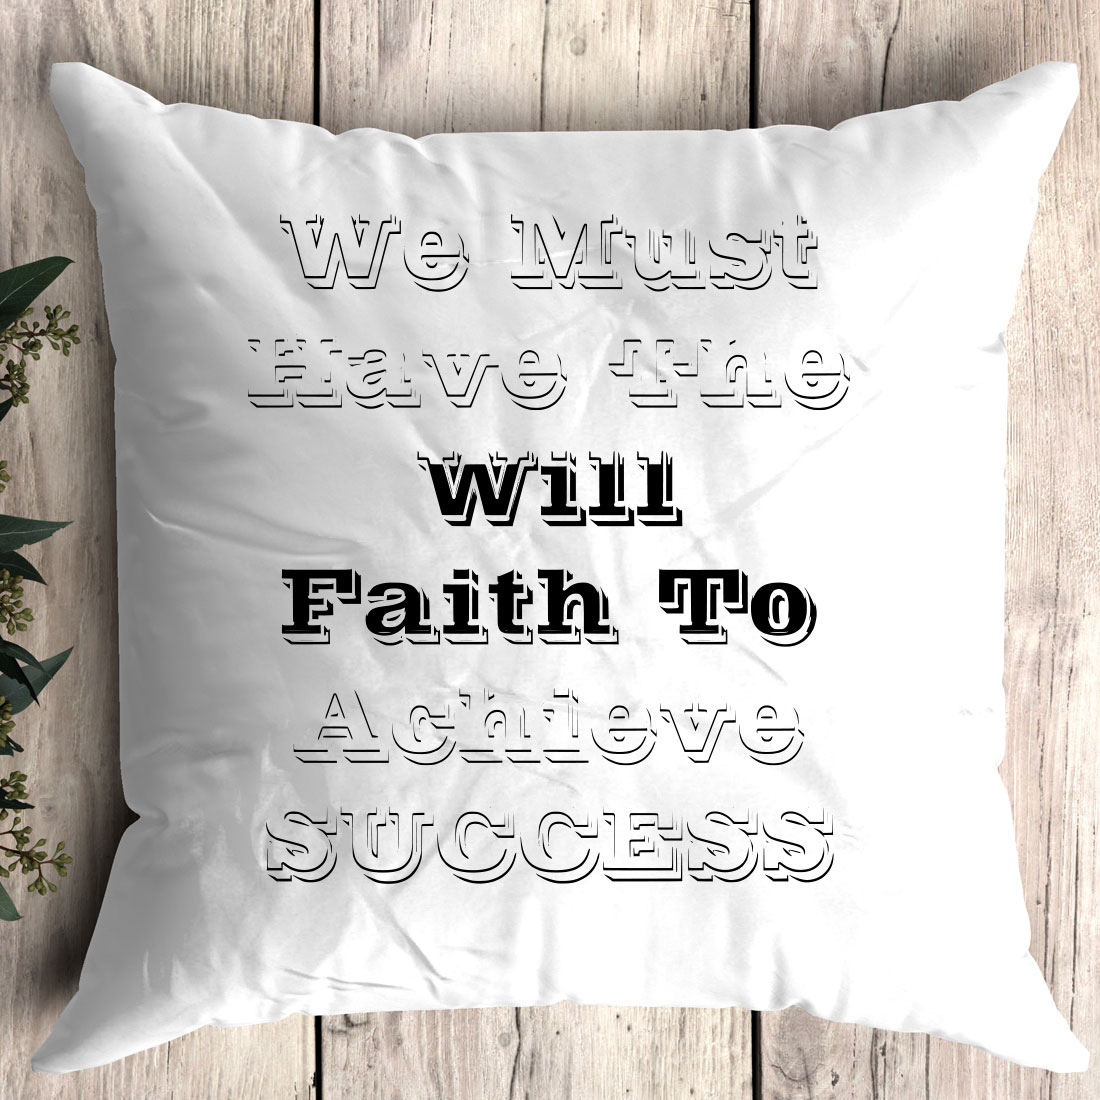 Pillow that says we must have the will faith to achieve success.